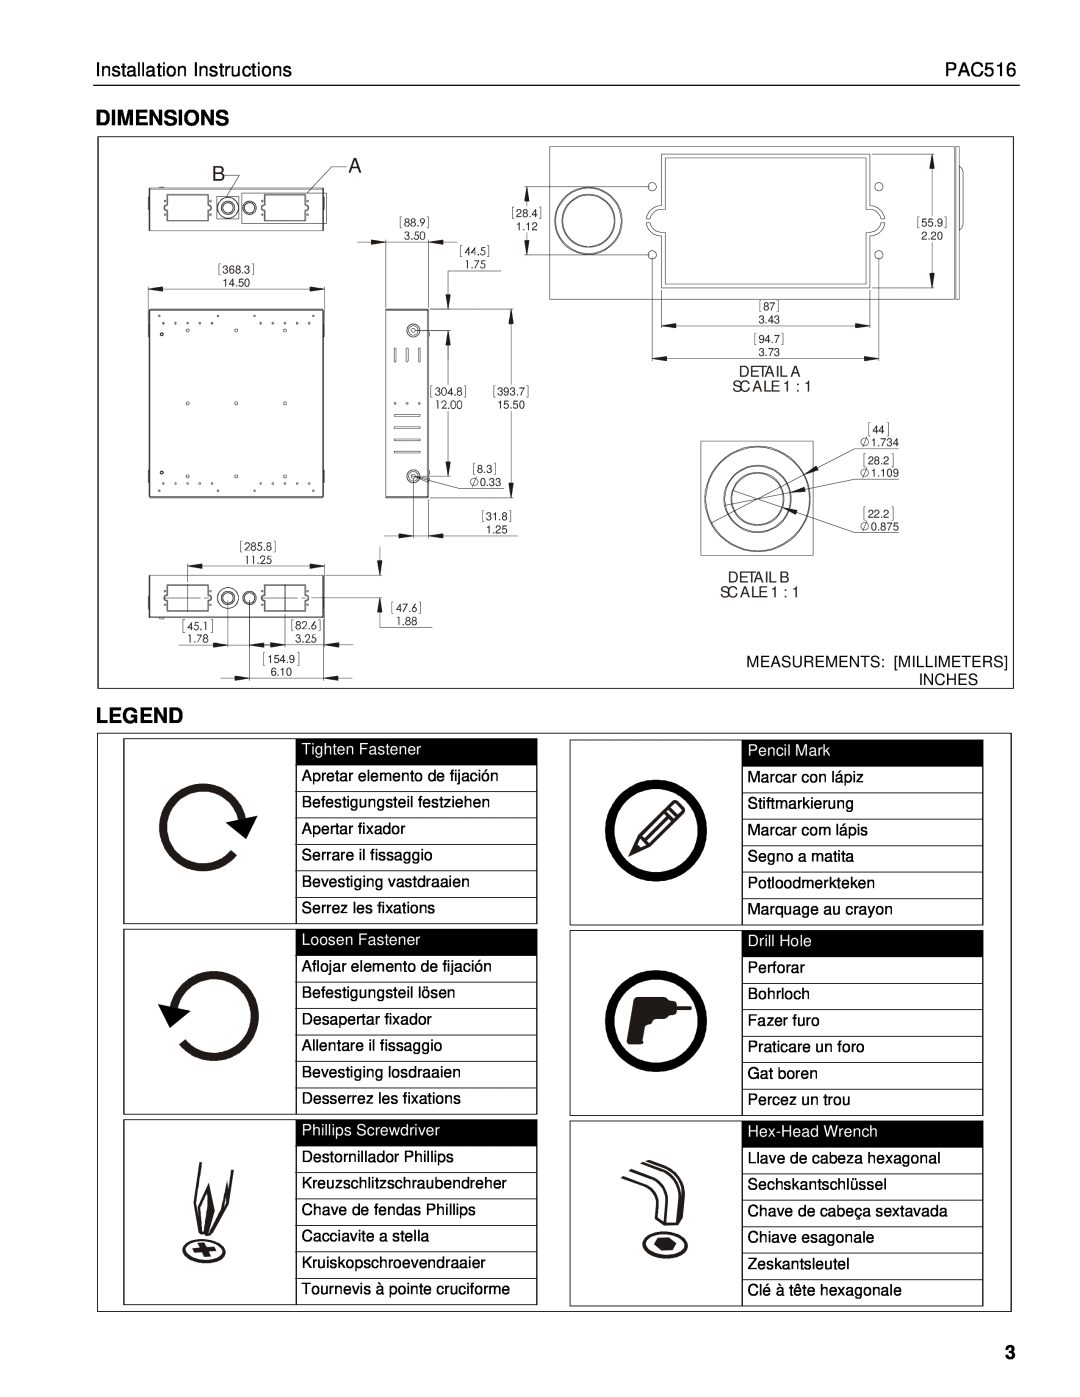 Chief Manufacturing PAC516 Dimensions, Installation Instructions, Measurements Millimeters, Inches, Pencil Mark 